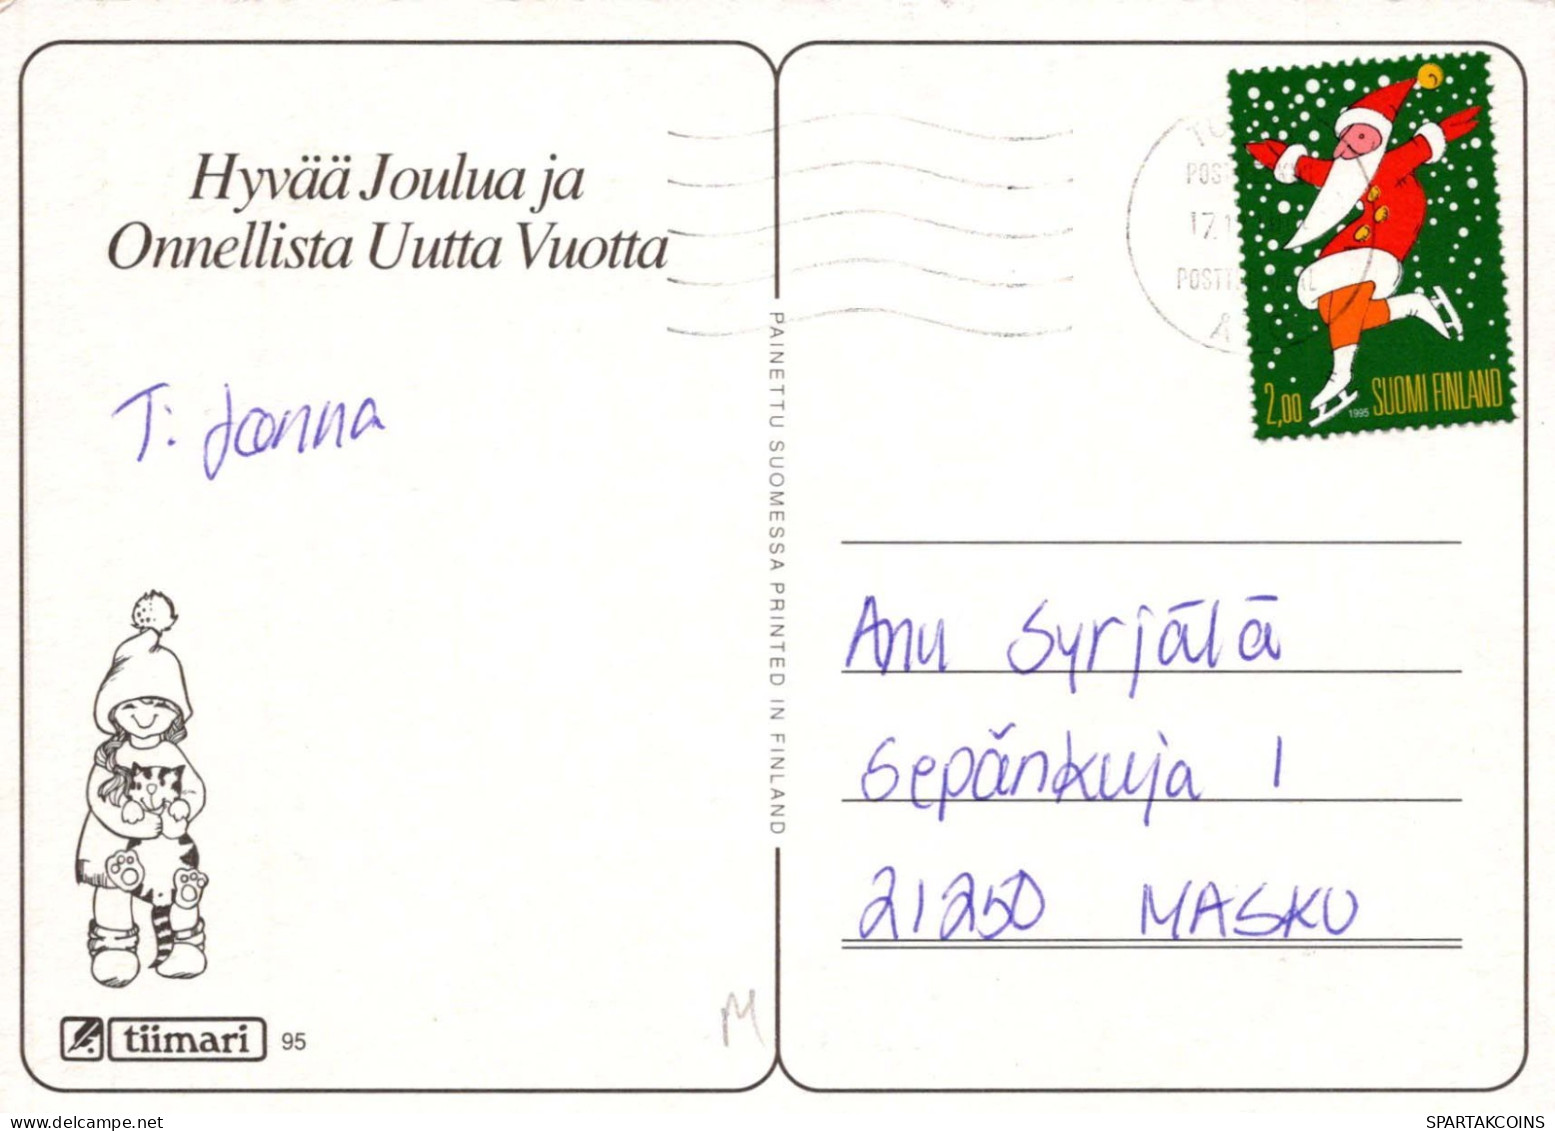 BABBO NATALE Buon Anno Natale Vintage Cartolina CPSM #PBL356.IT - Kerstman